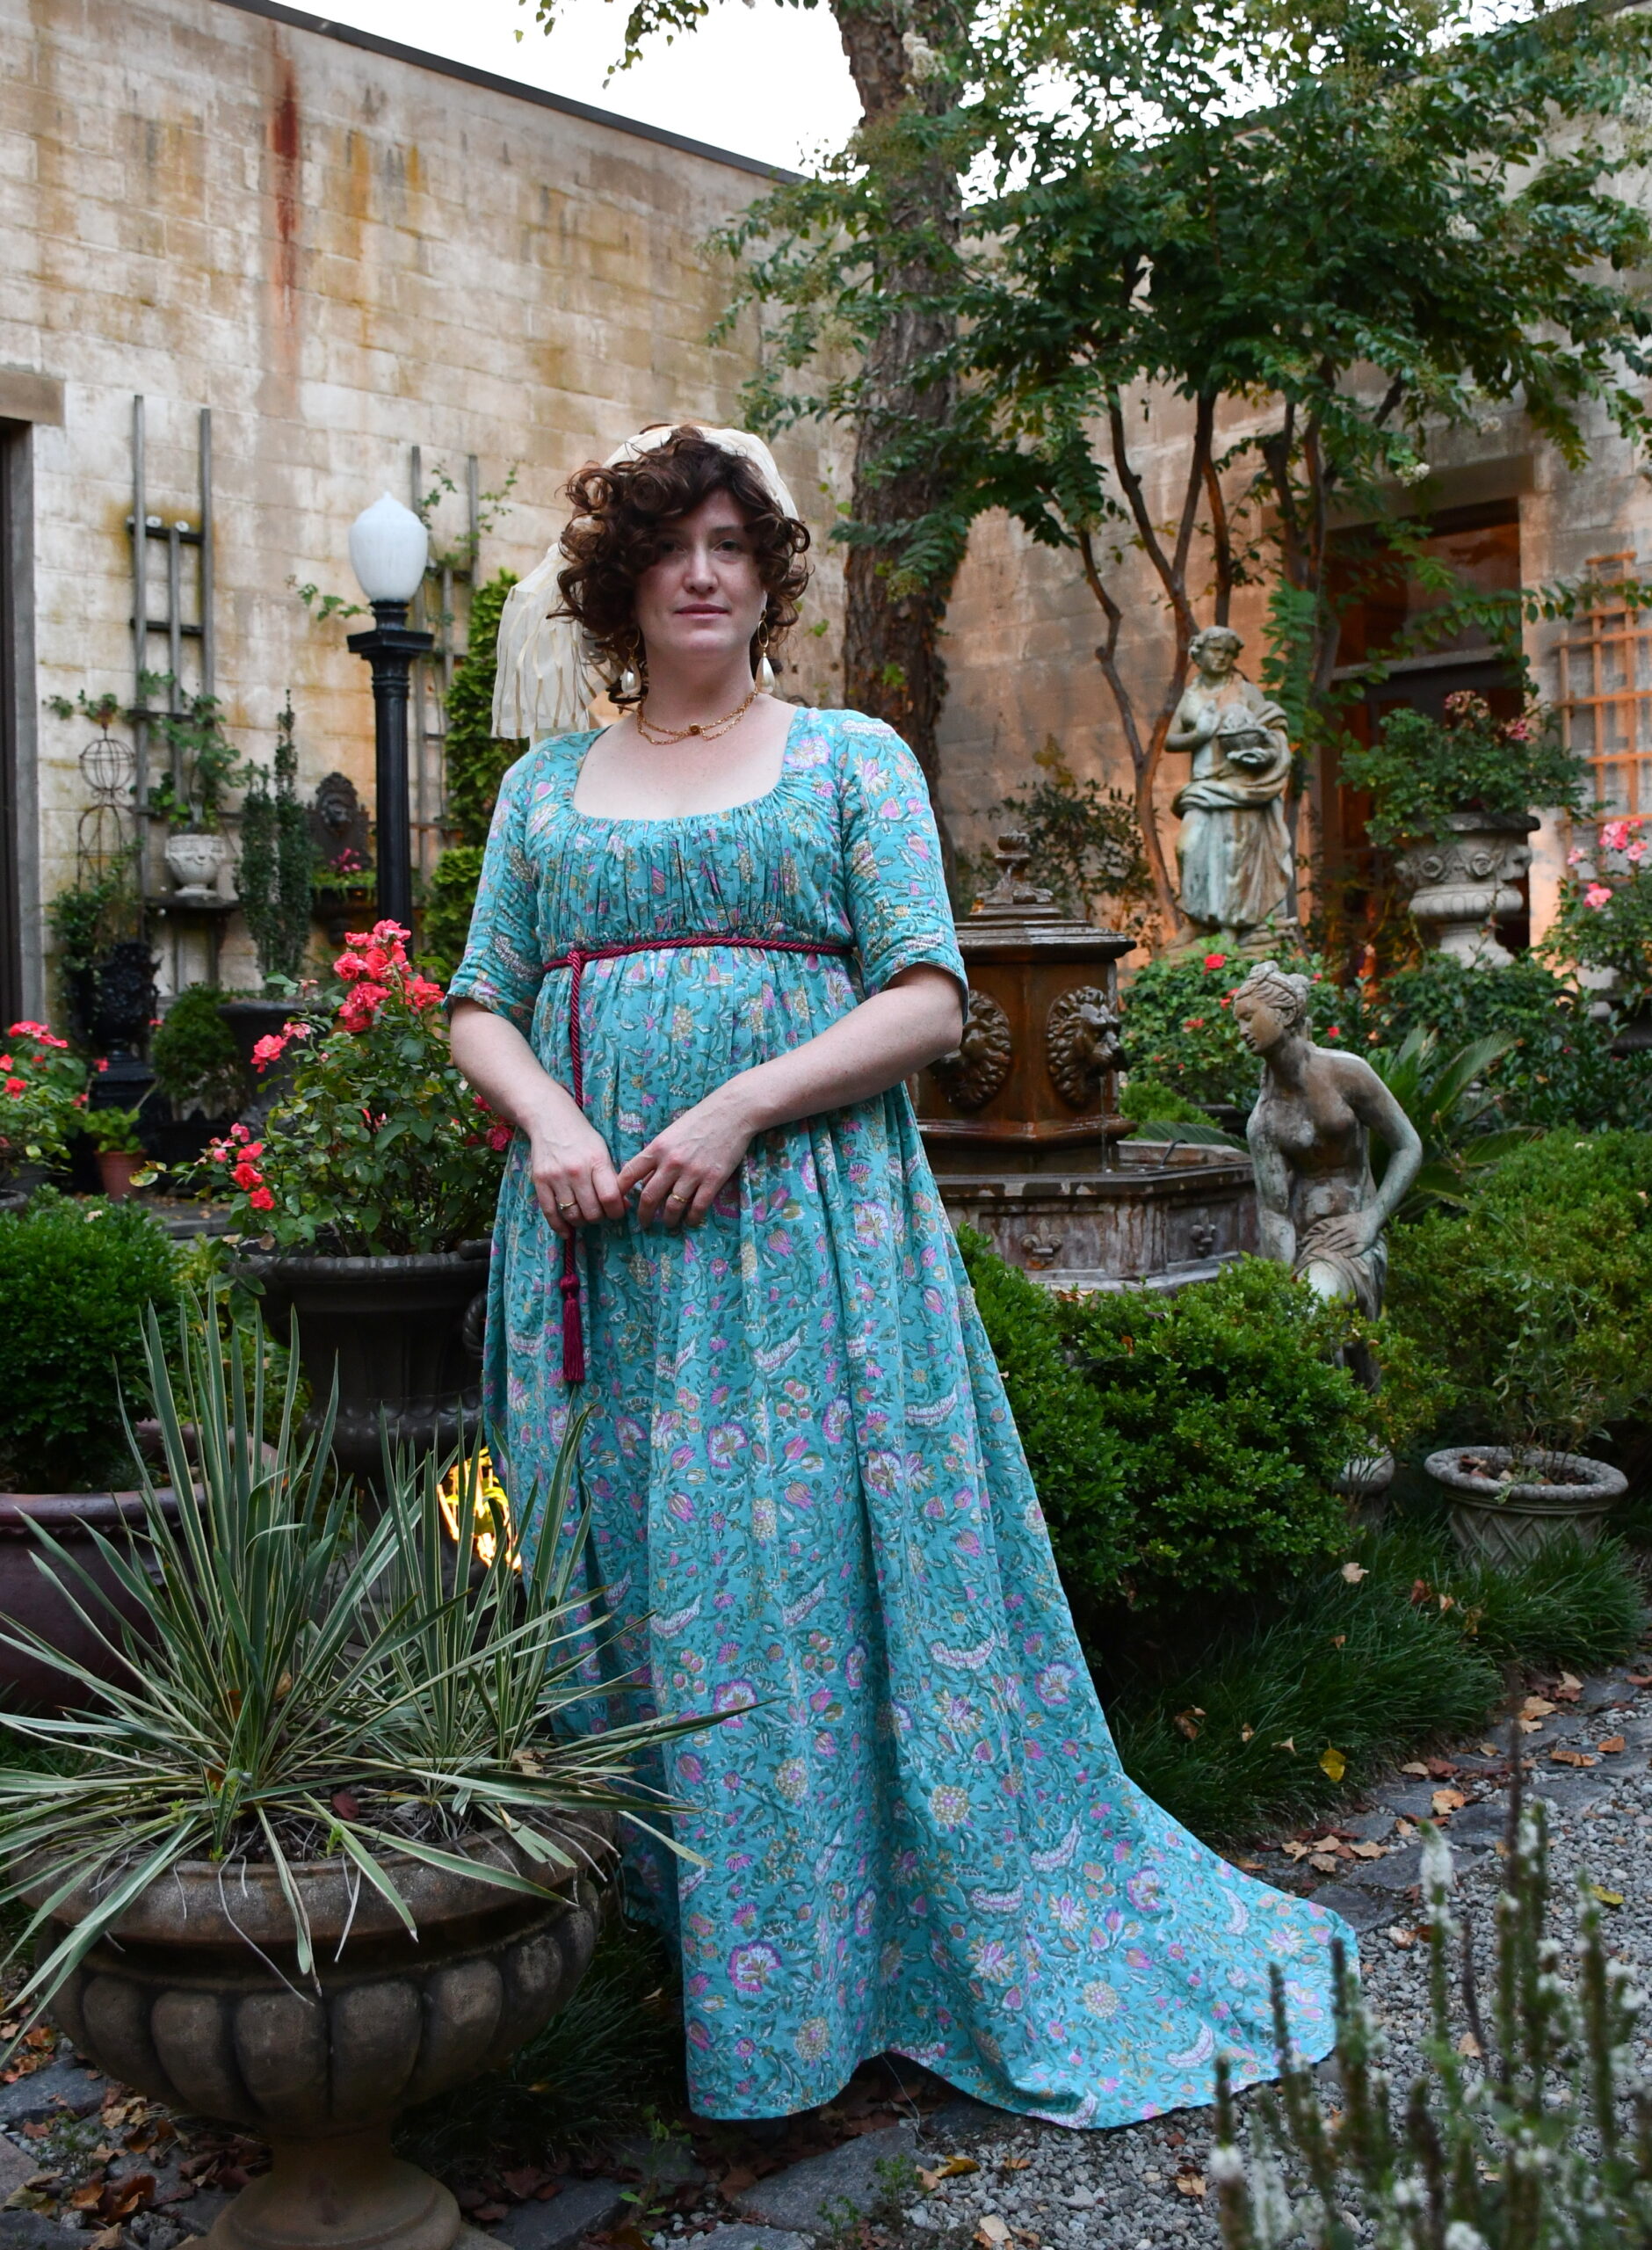 Tabubilgirl stands in a garden wearing a floral cotton 1790s round gown